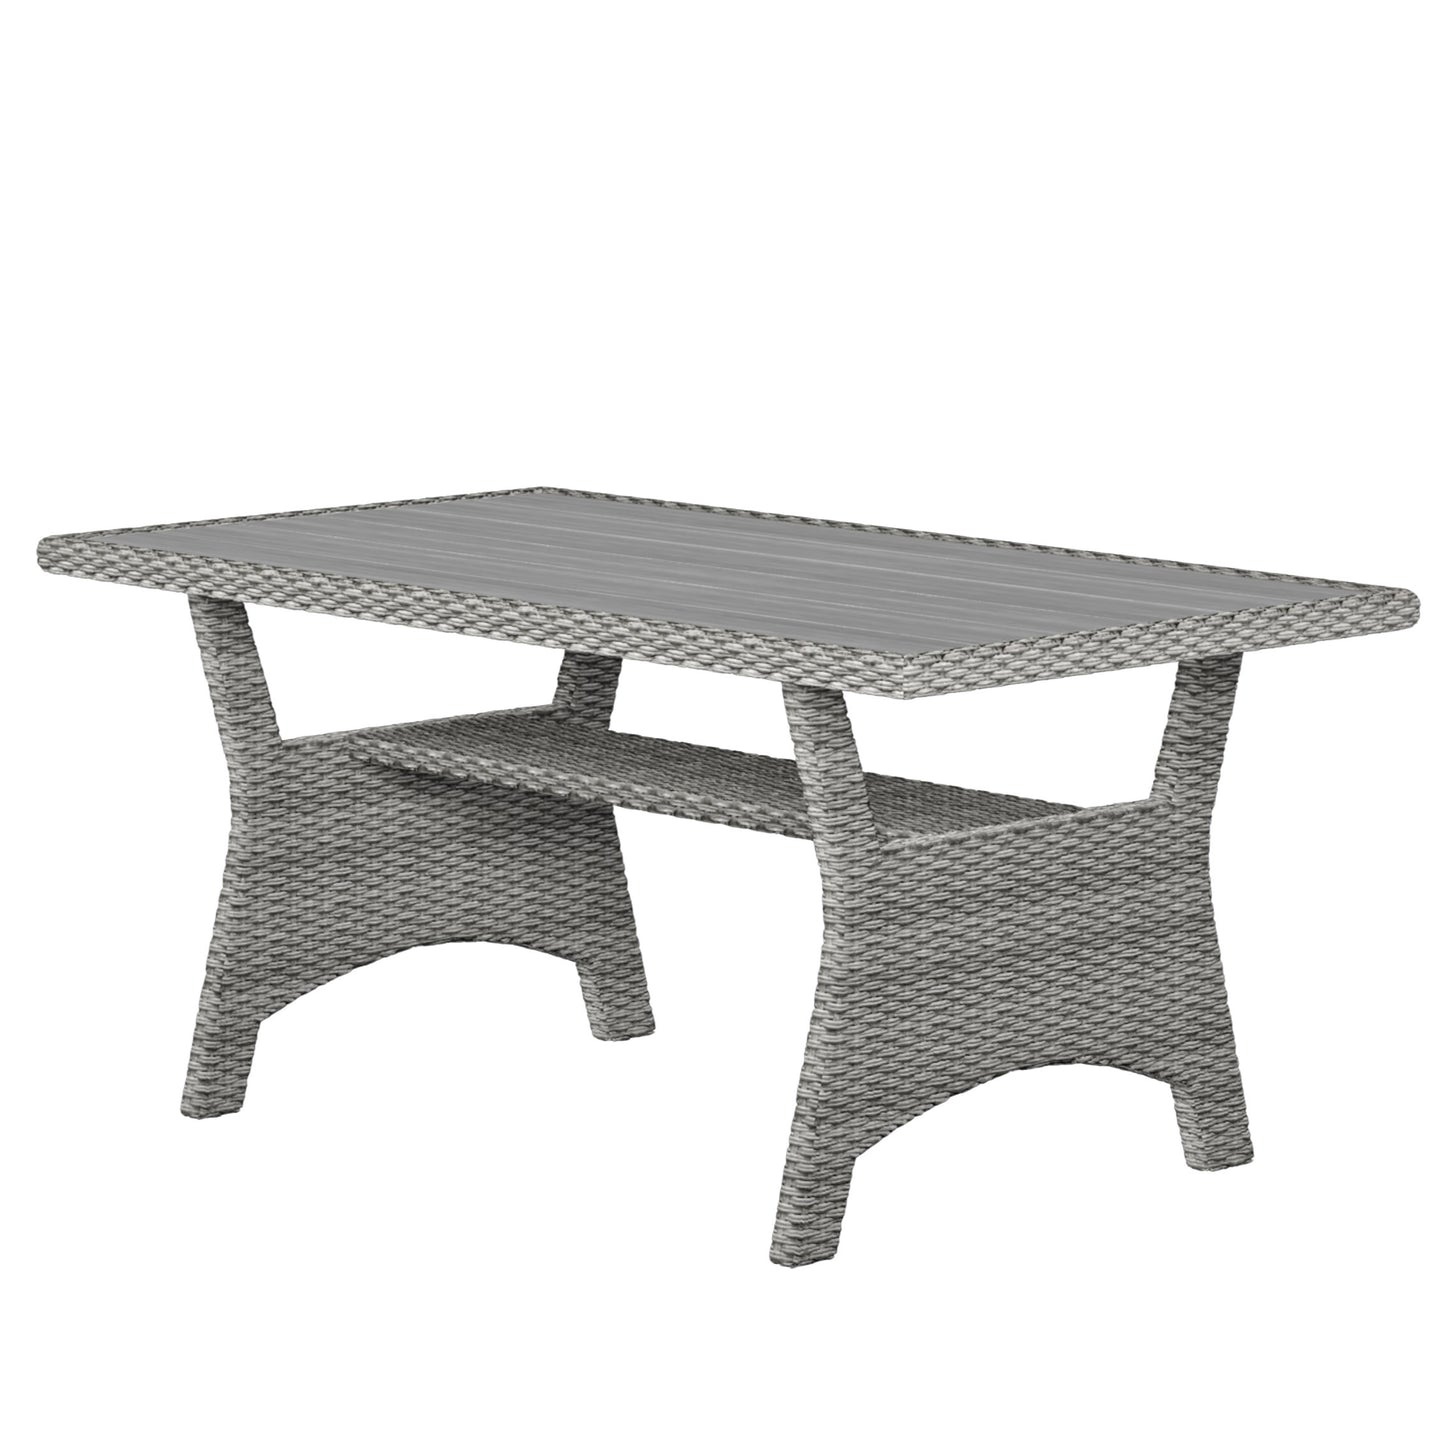 VINH Aluminum and Wicker Table